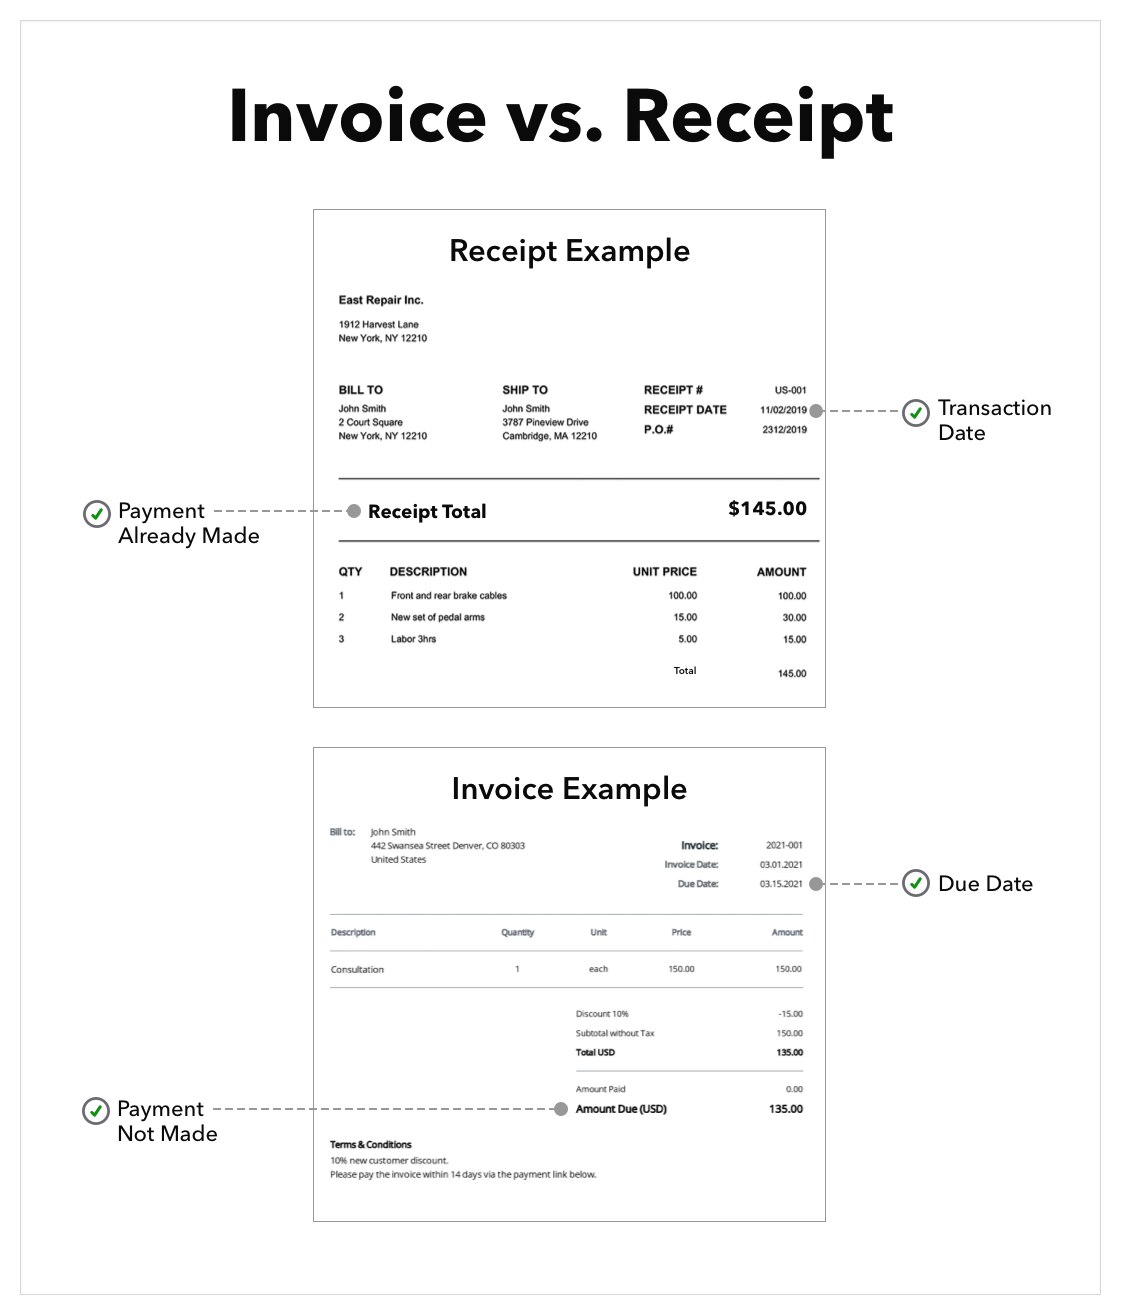 Invoices Vs Receipts Understanding The Difference Article